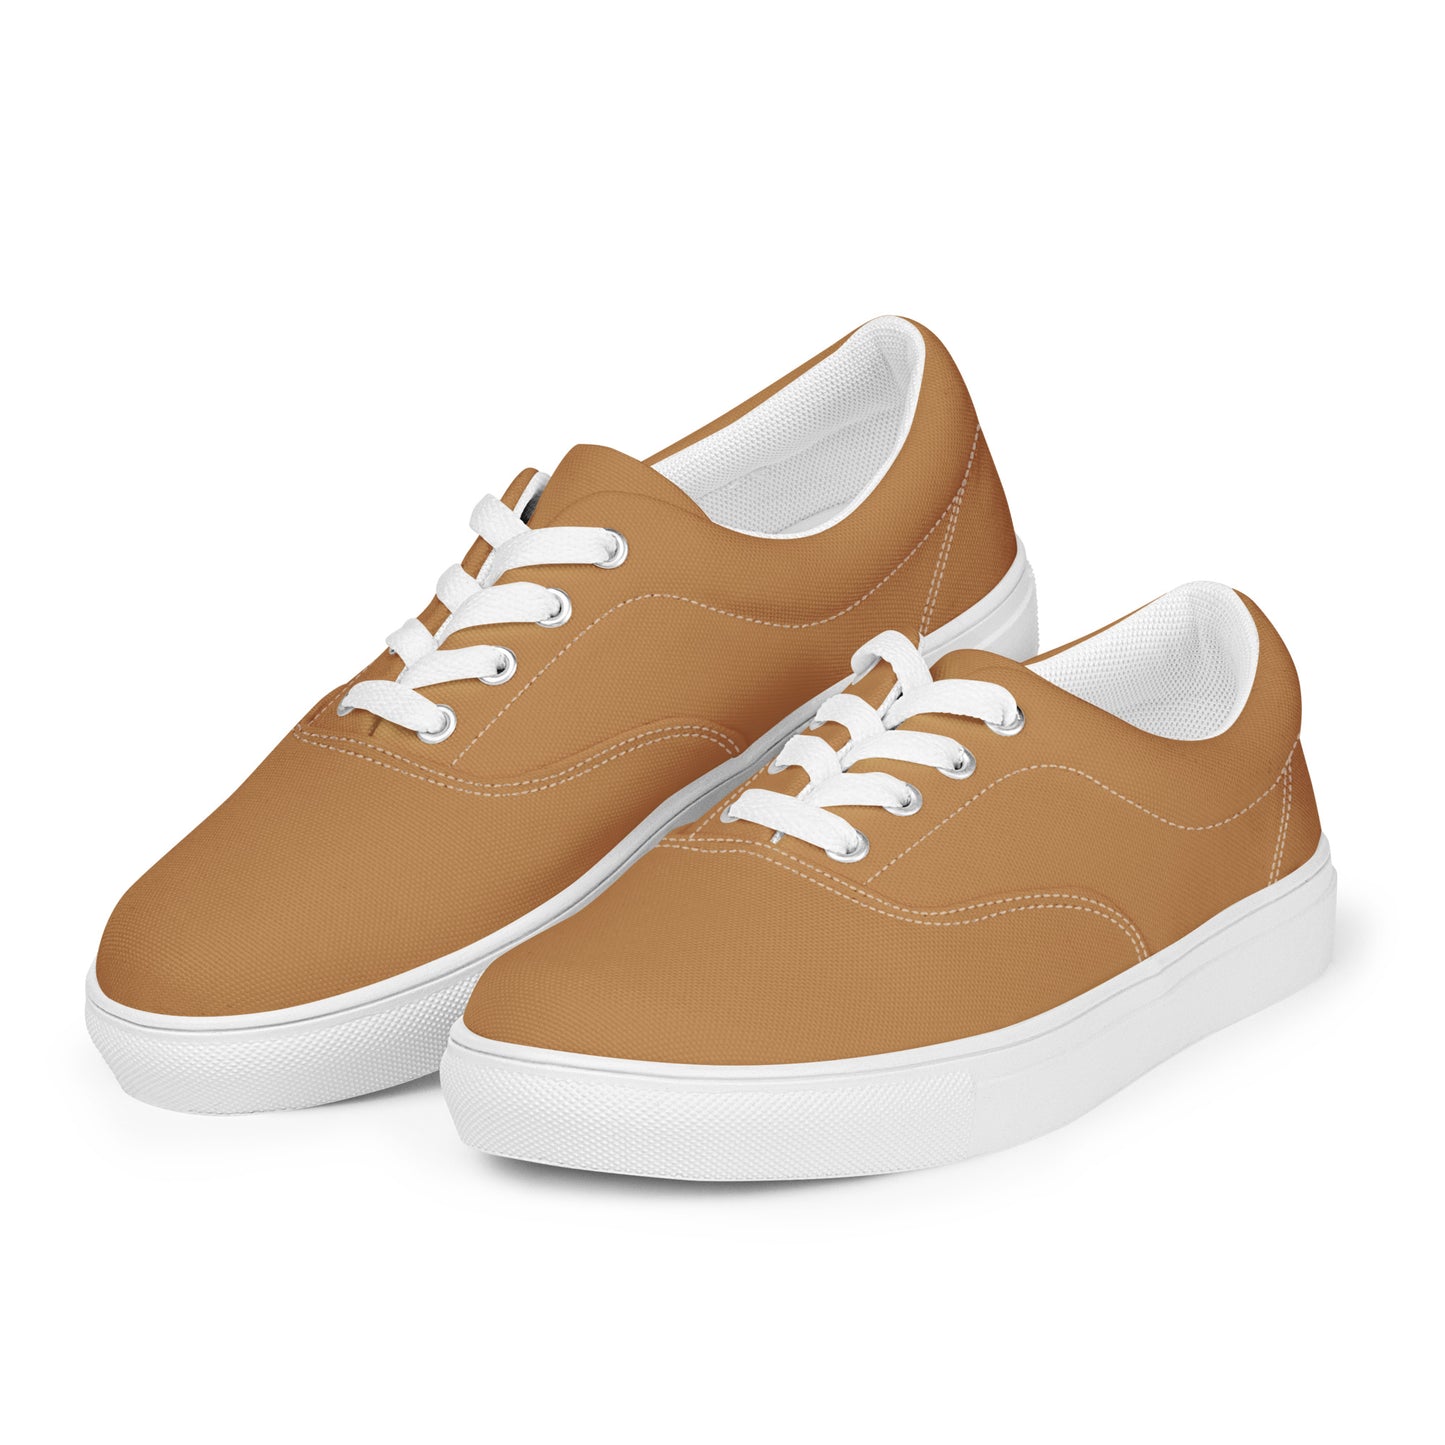 Women’s Nude Lace-up Canvas Shoes